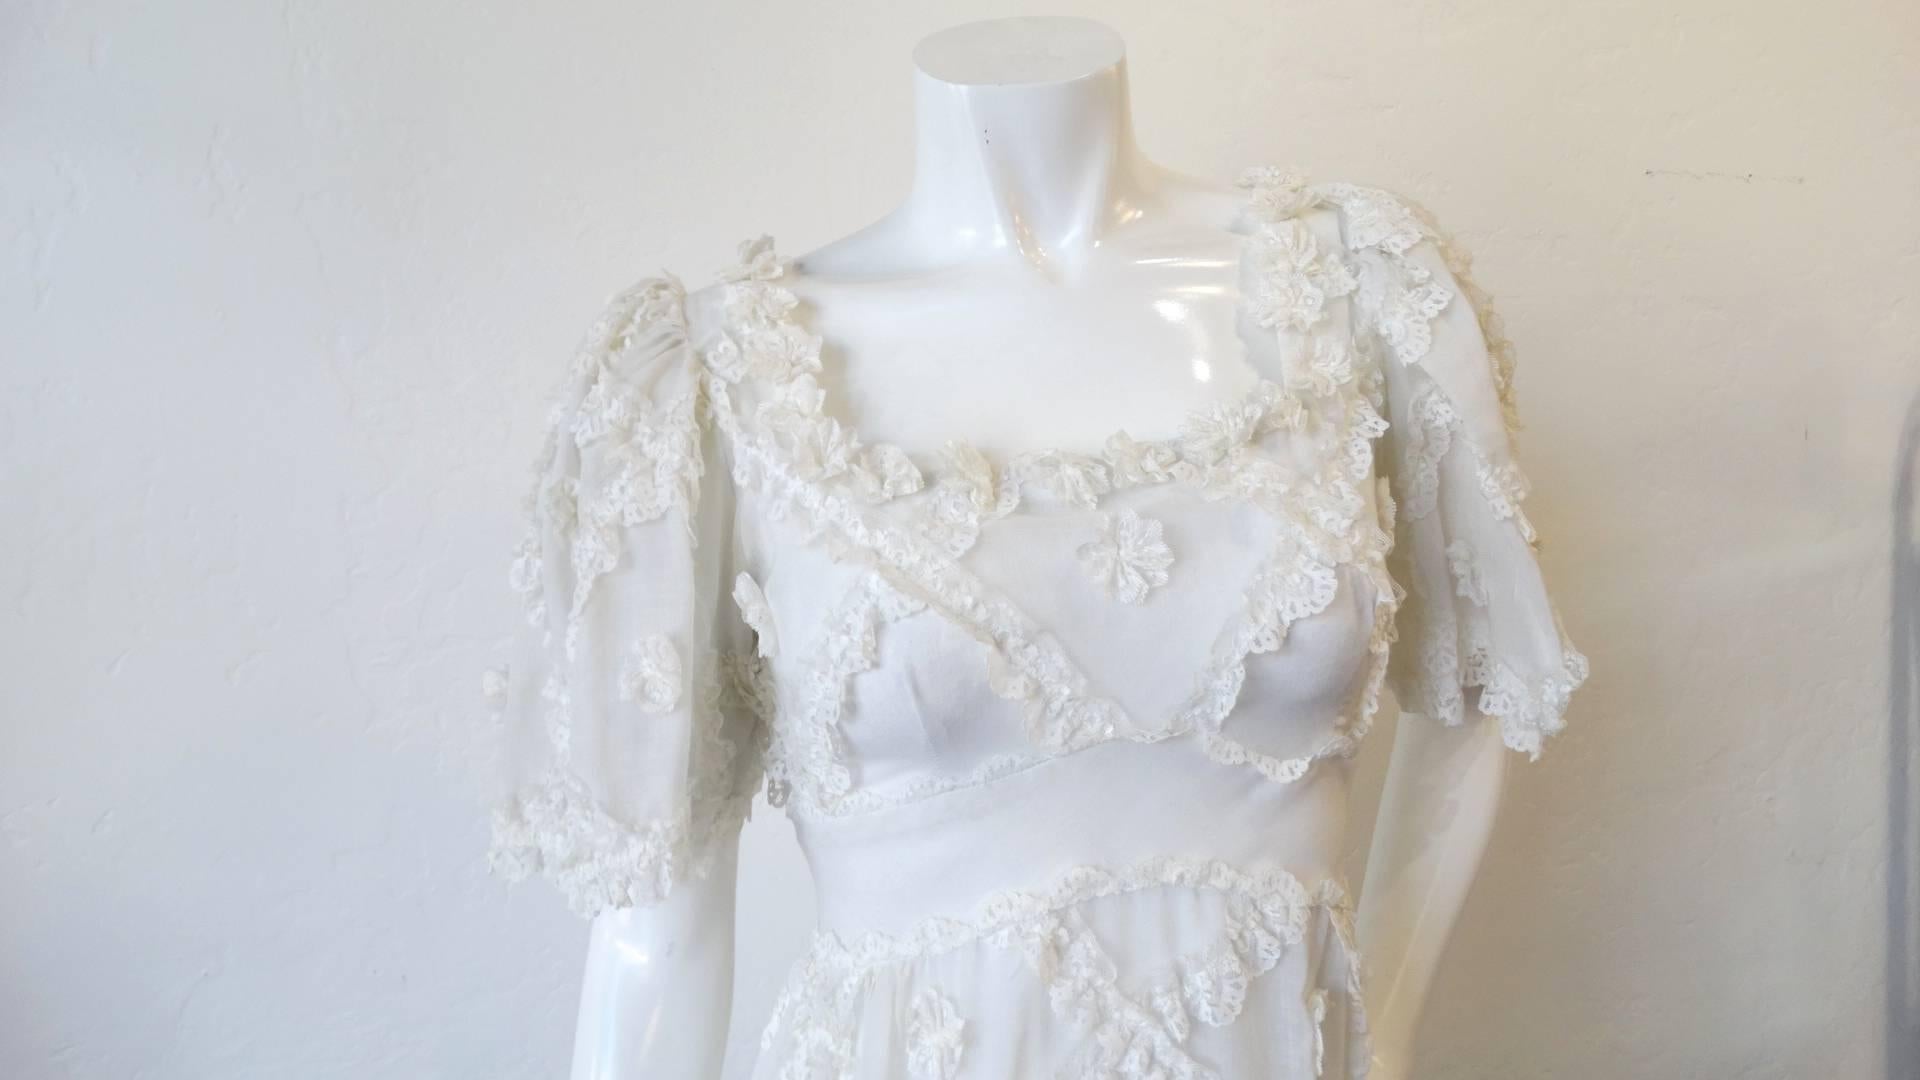 The most adorable cream lace ruffle maxi dress from the 1970s! White cotton fabric with ruffled lace stitched in a diamond pattern. Flattering empire waistline with puffed sleeves. Zips up the back. This dress measures 30